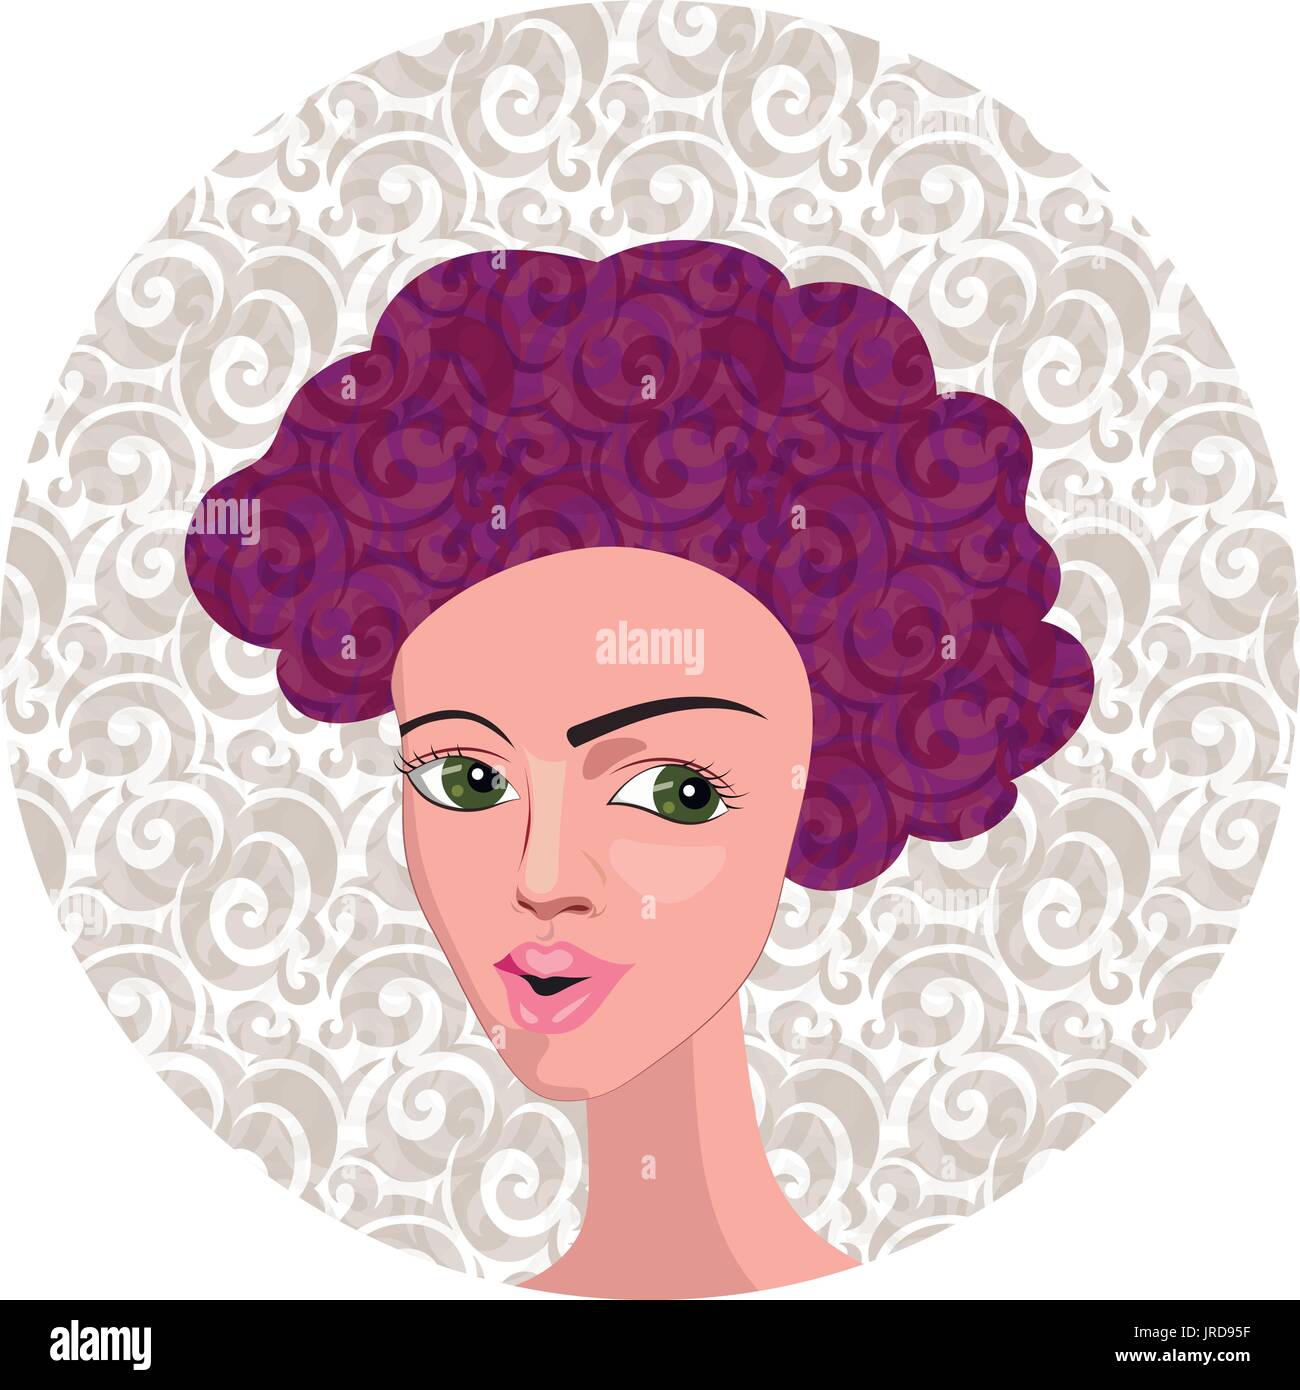 Vector Illustration of Cartoon Girl with Curly Hair Stock Vector